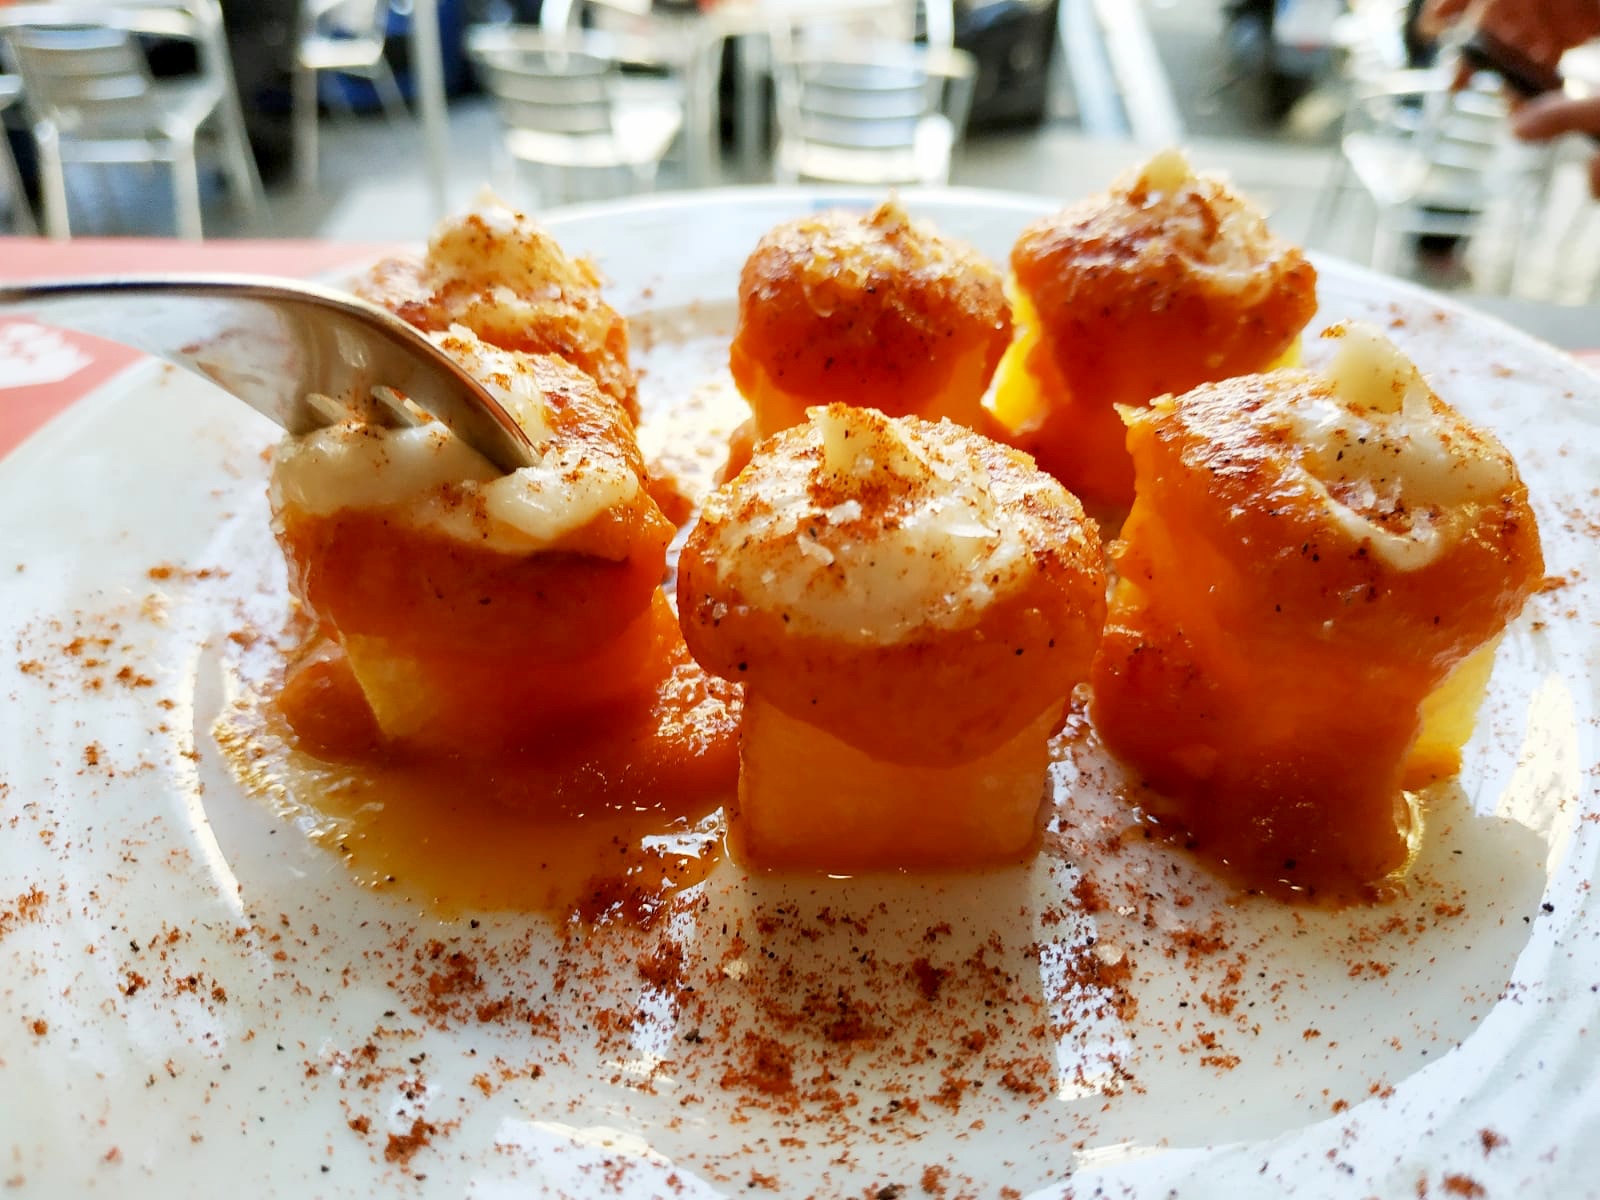 Patatas bravas are not only one of the best tapas in Barcelona, they're a favorite!